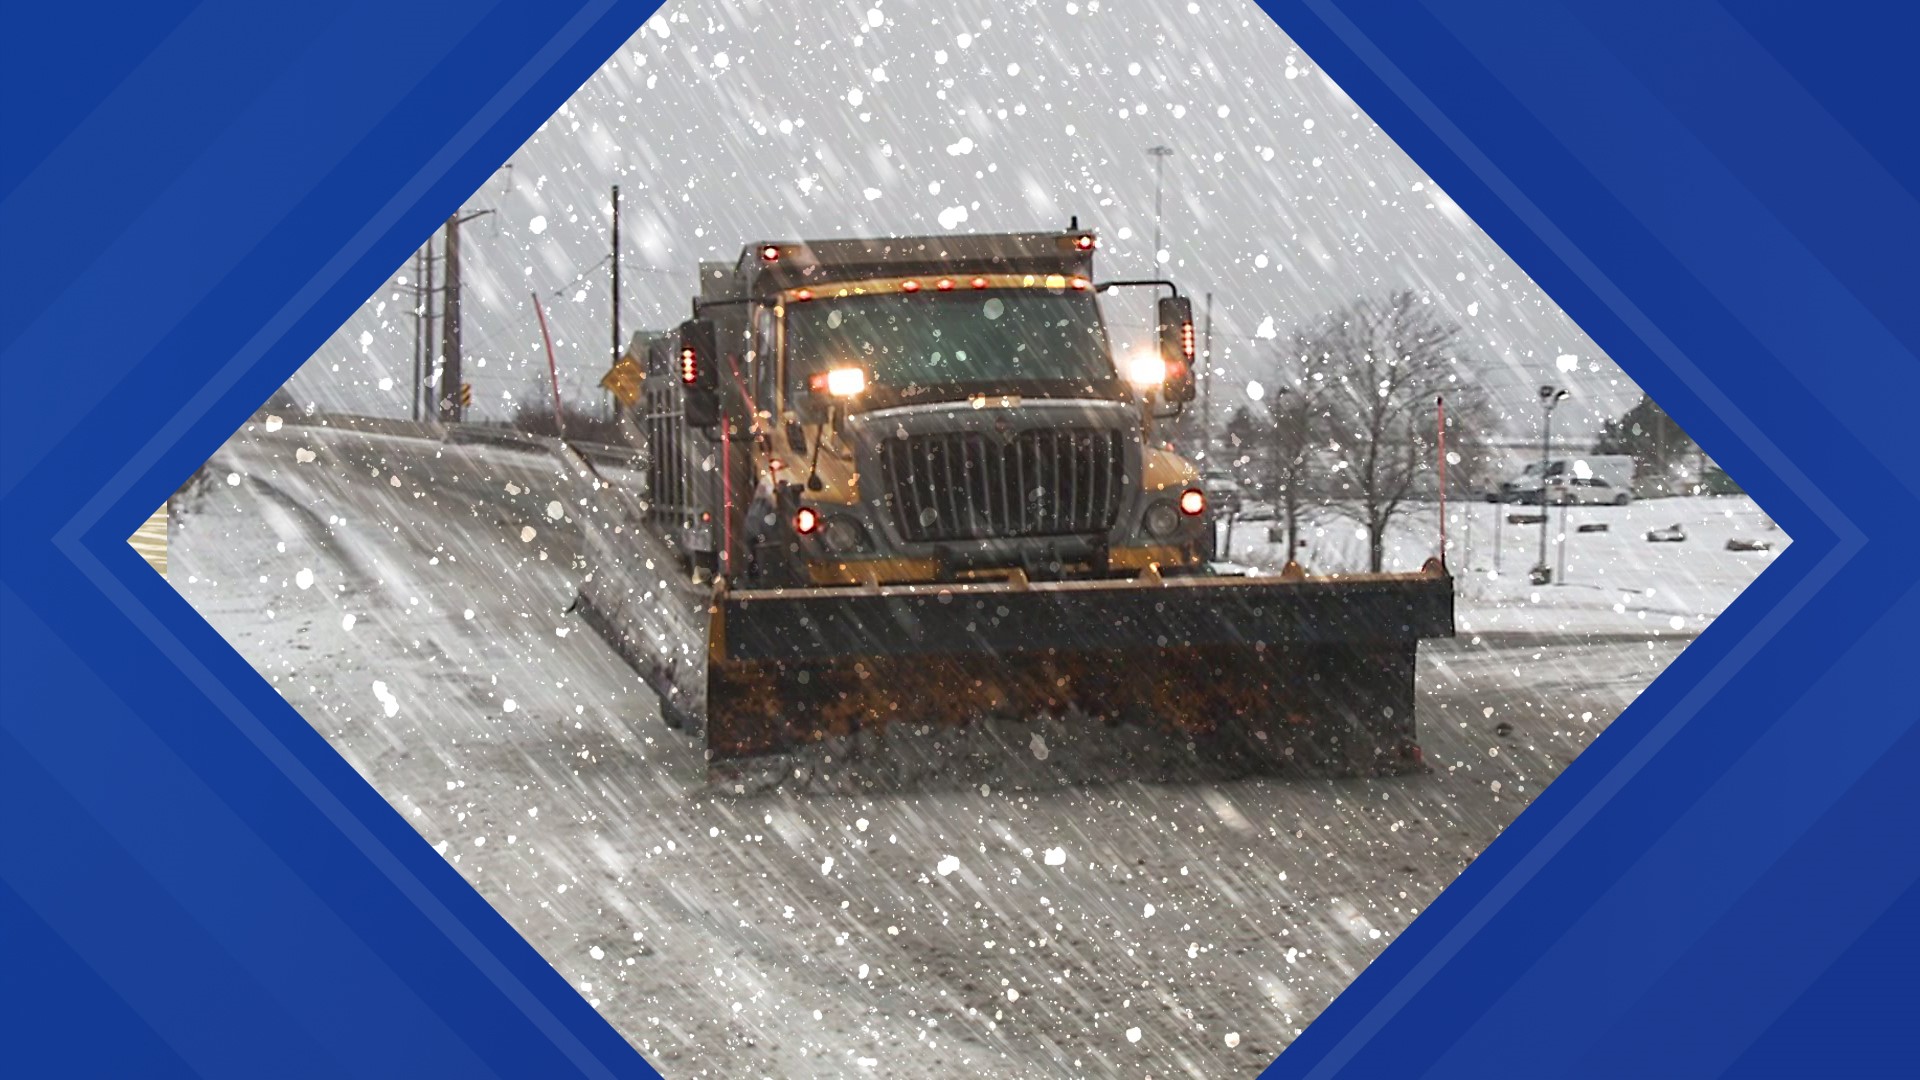 PennDOT is urging motorists to avoid unnecessary travel but those who must head out will see speeds reduced to 45 mph.